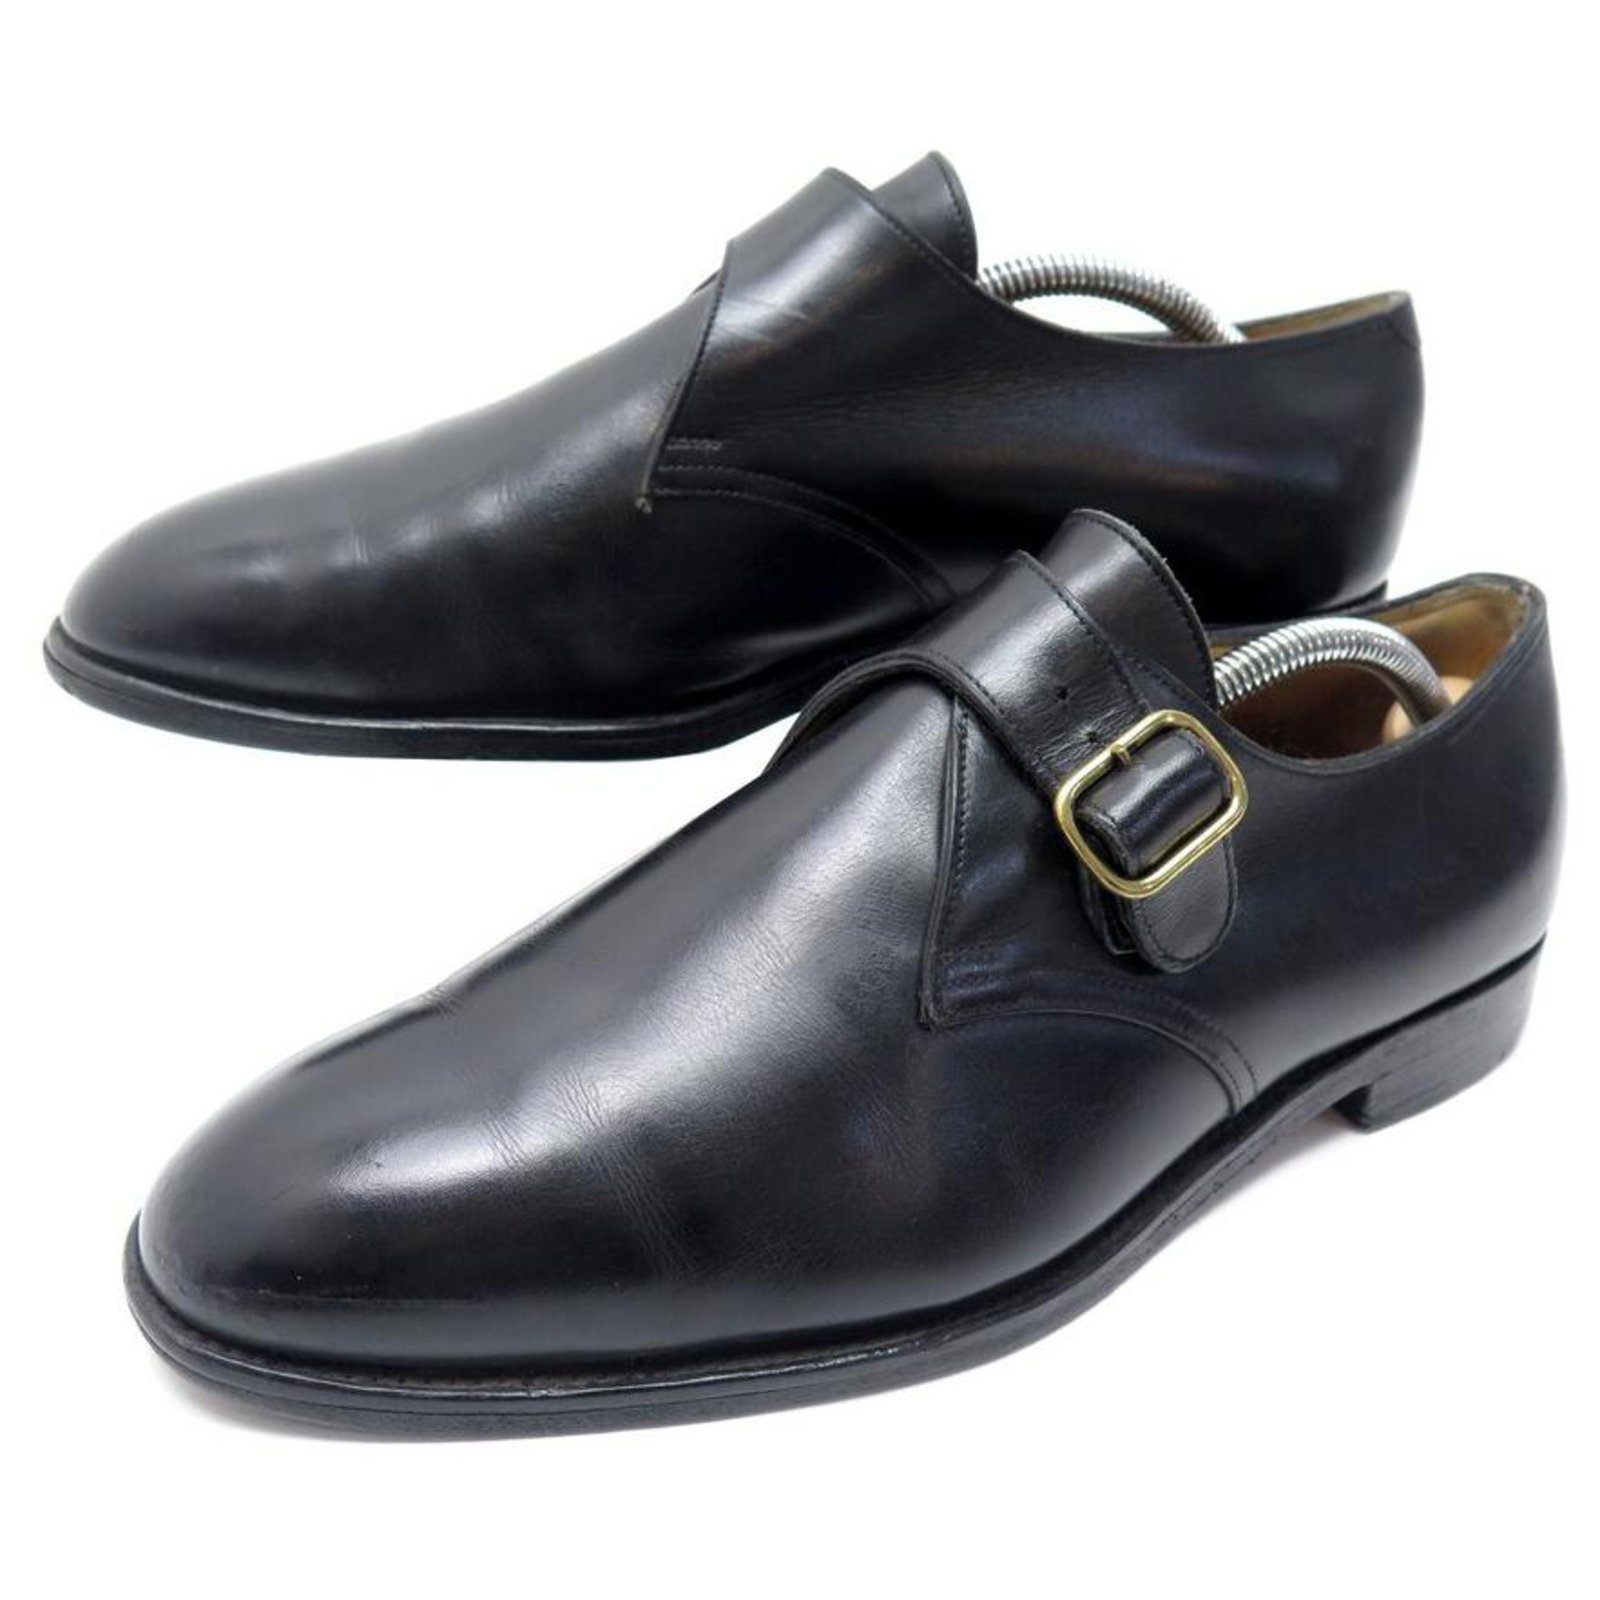 JOHN LOBB FOULD SHOES 8E 42 BLACK LEATHER BUCKLE LOAFERS + STRAPS